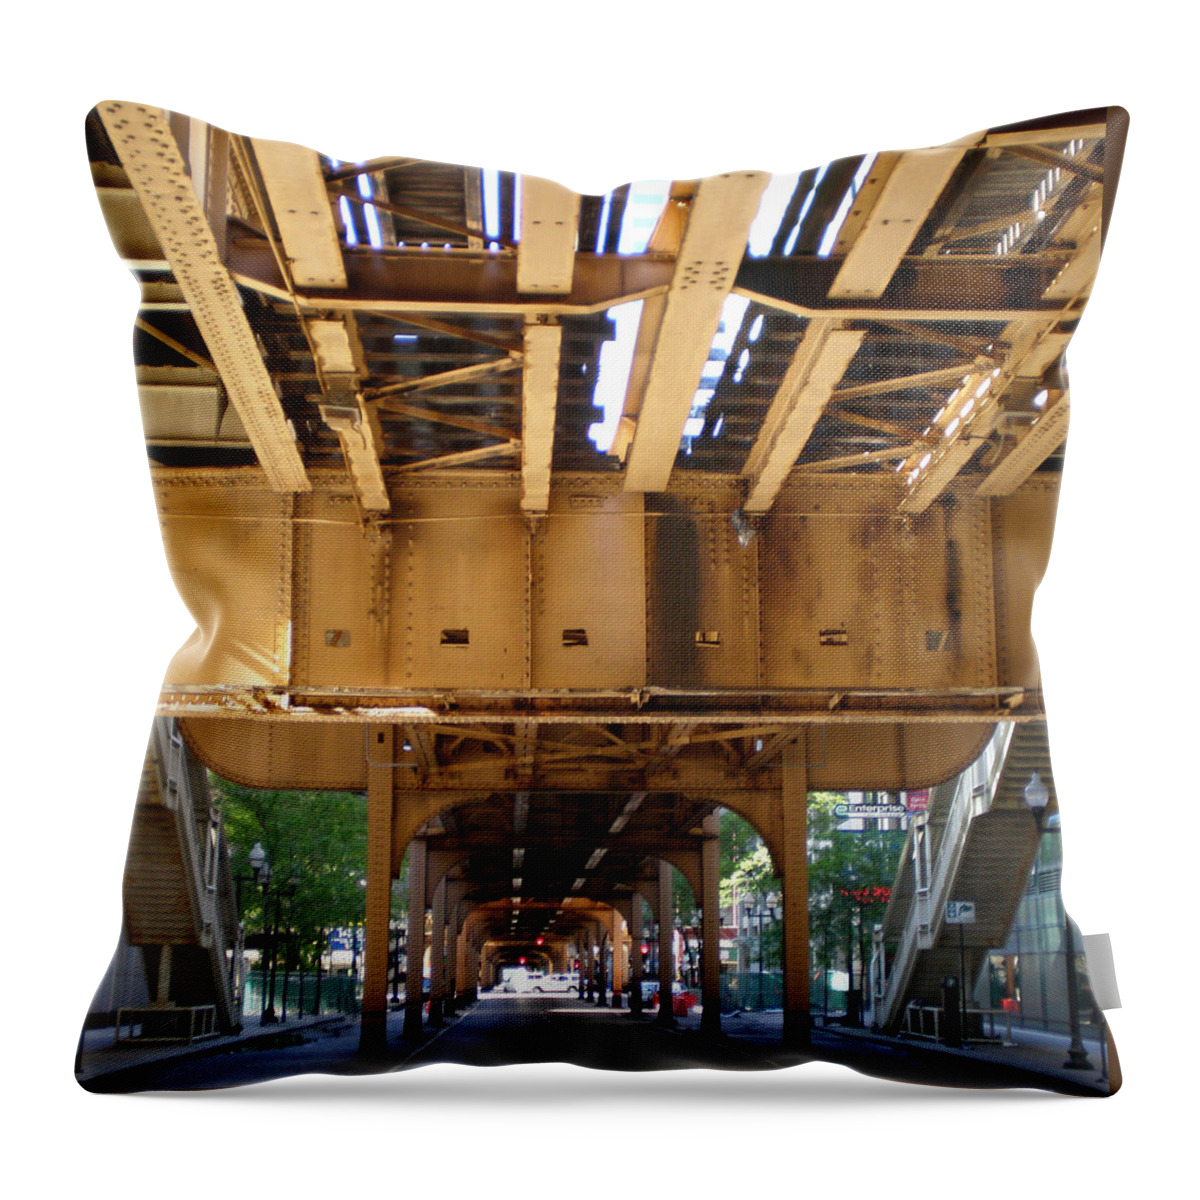 El Throw Pillow featuring the photograph Under The El - 1 by Ely Arsha